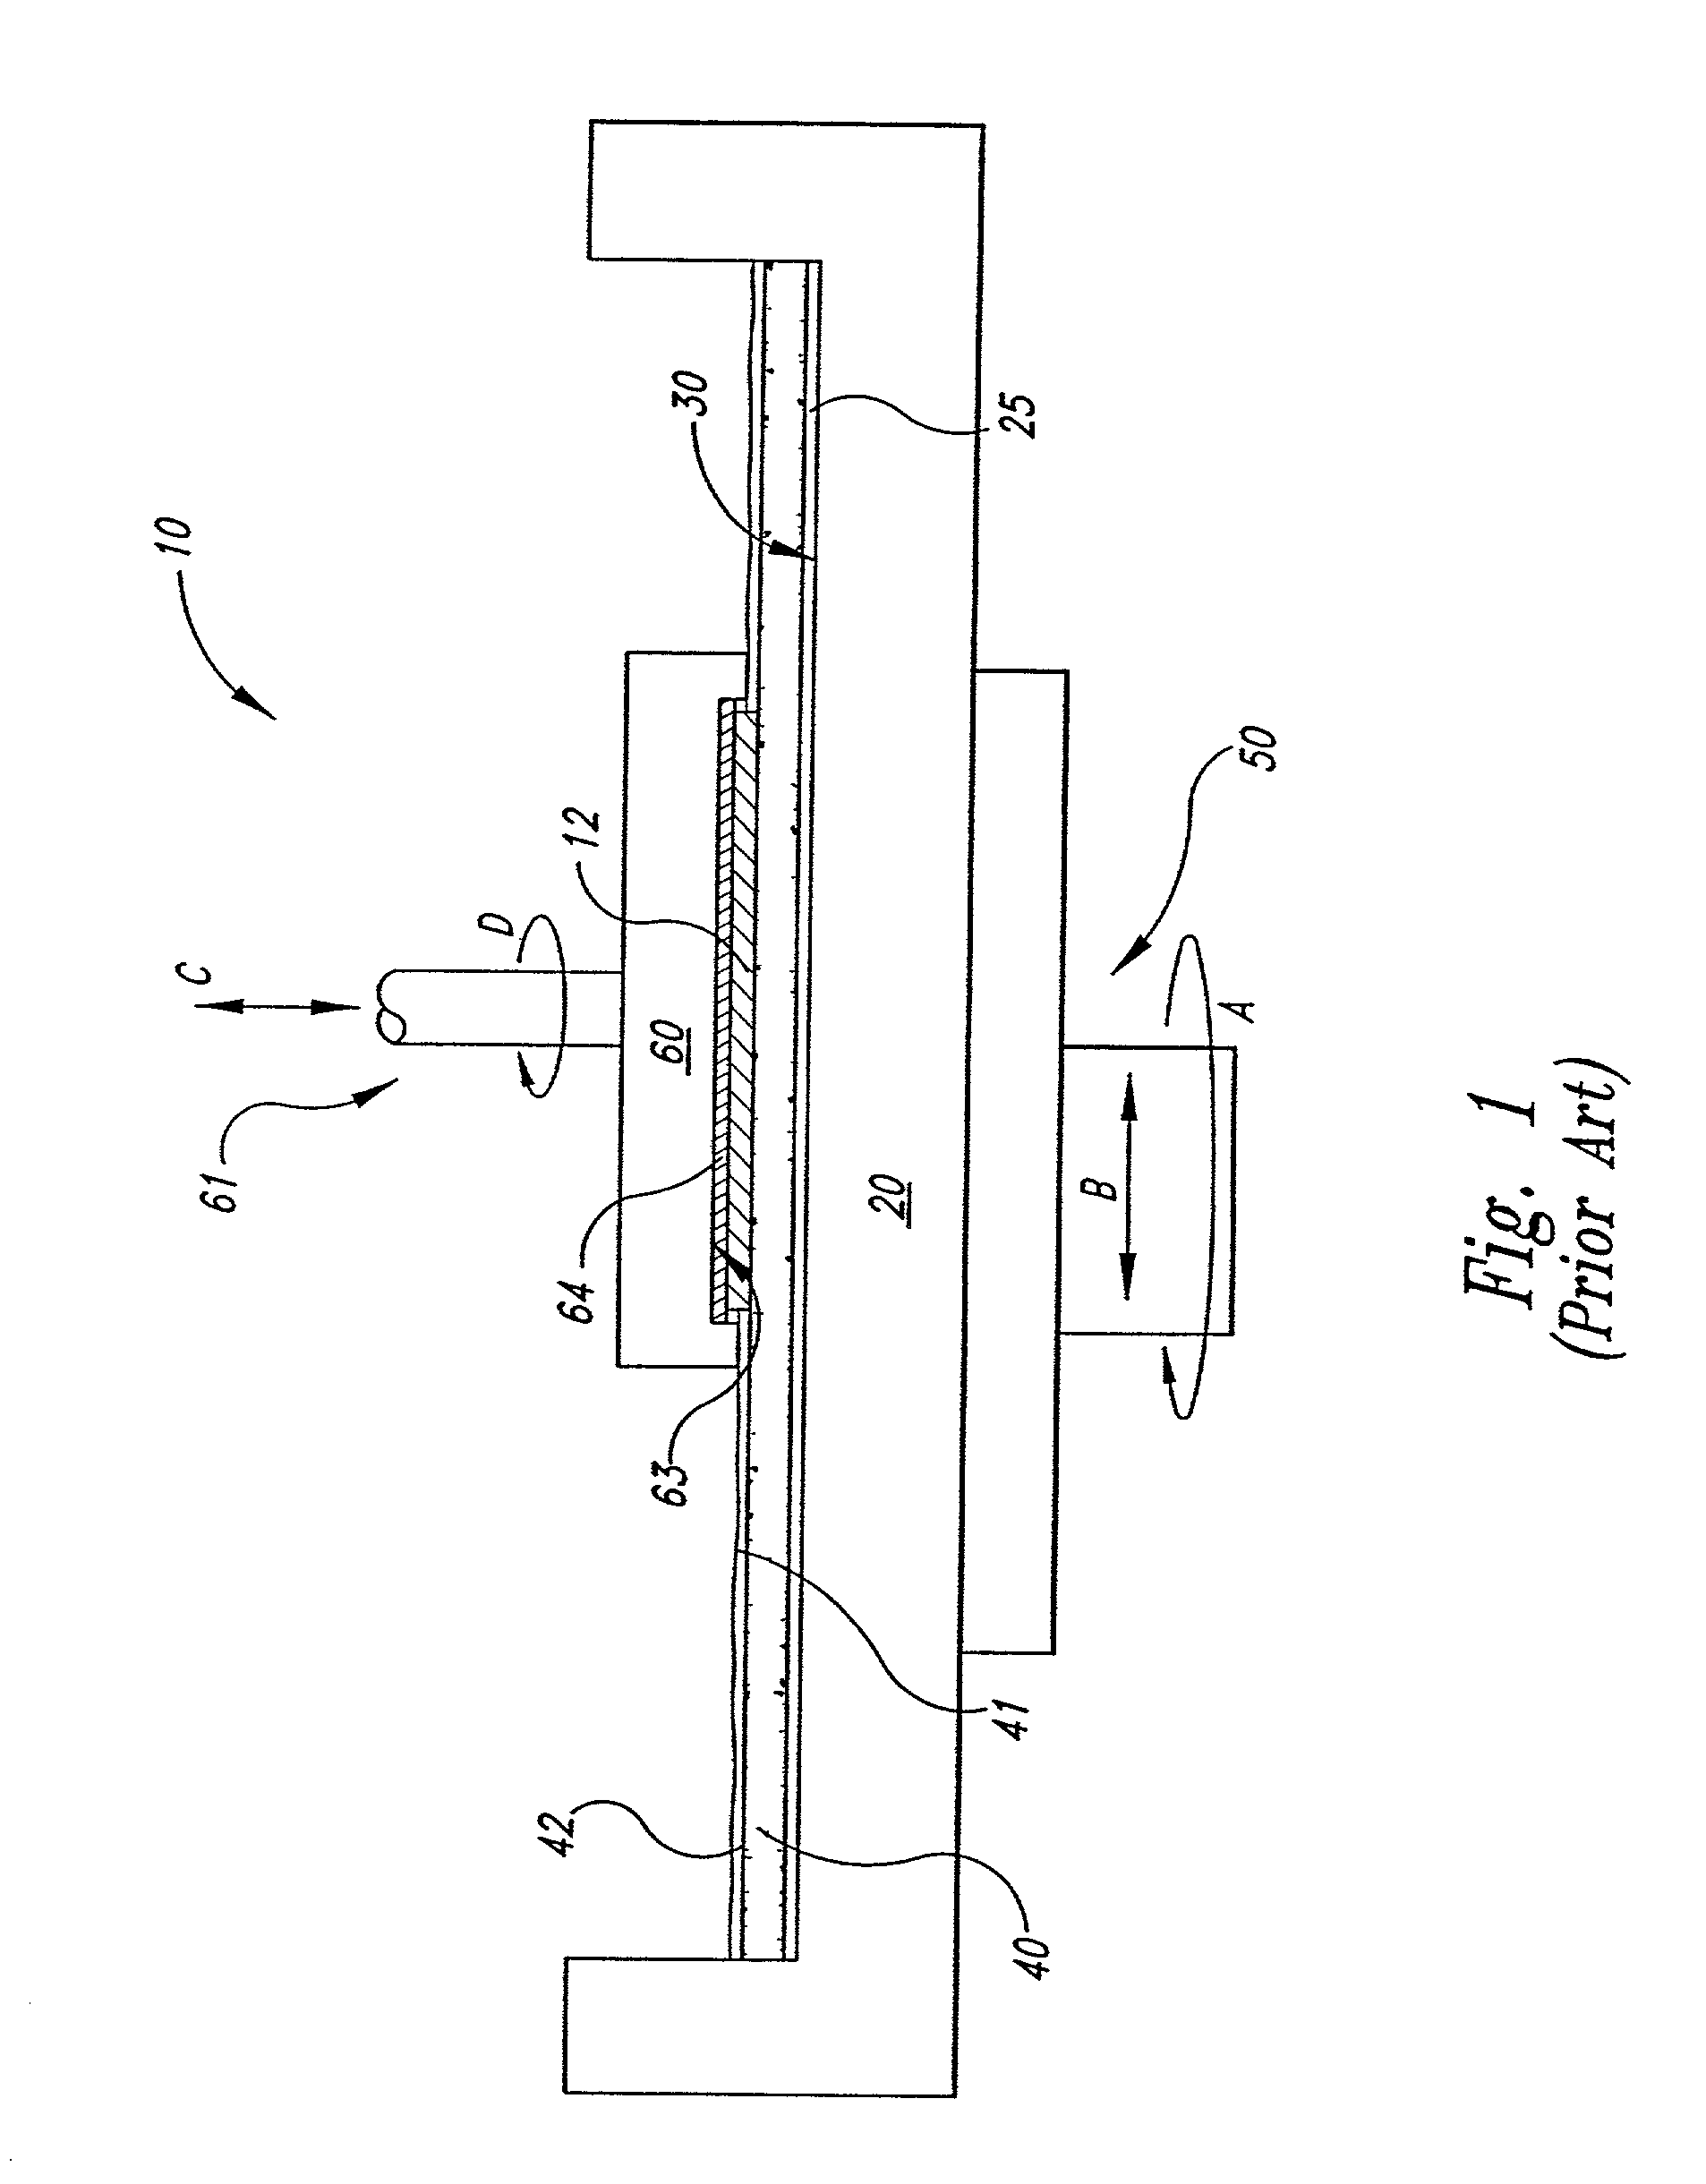 Method and apparatus for releasably attaching a polishing pad to a chemical-mechanical planarization machine